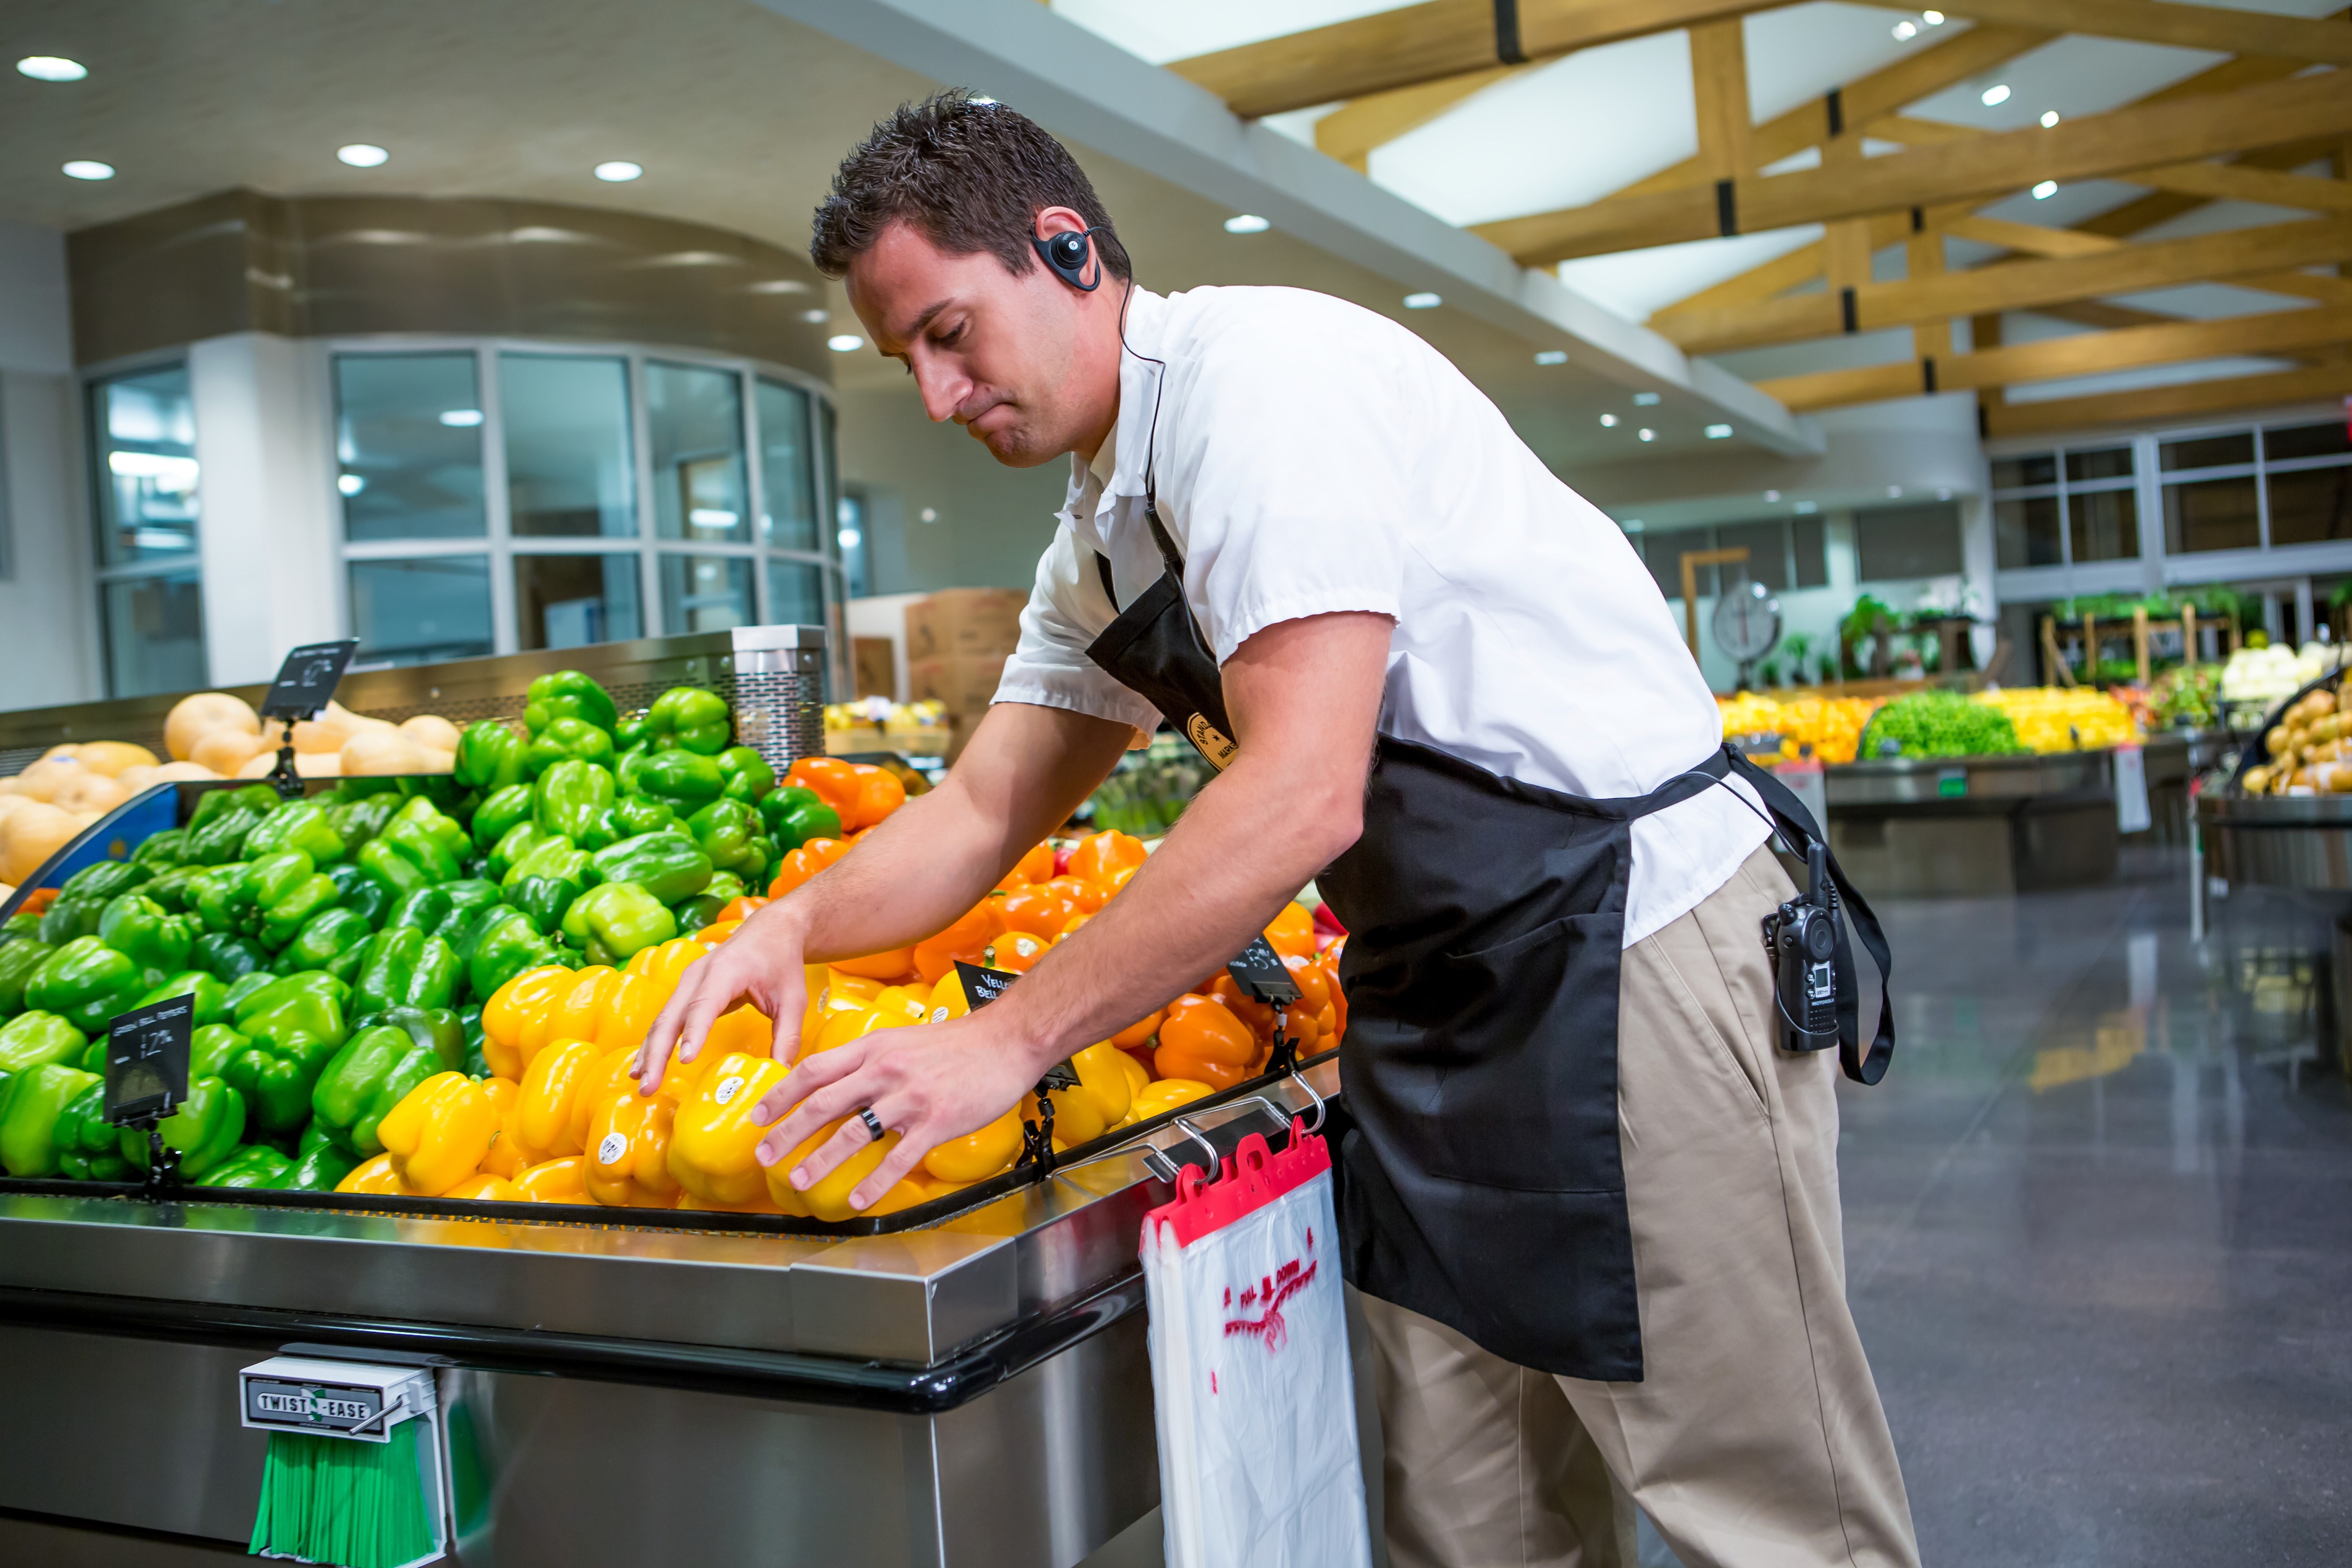 Grocery employees need to communicate about operational issues 